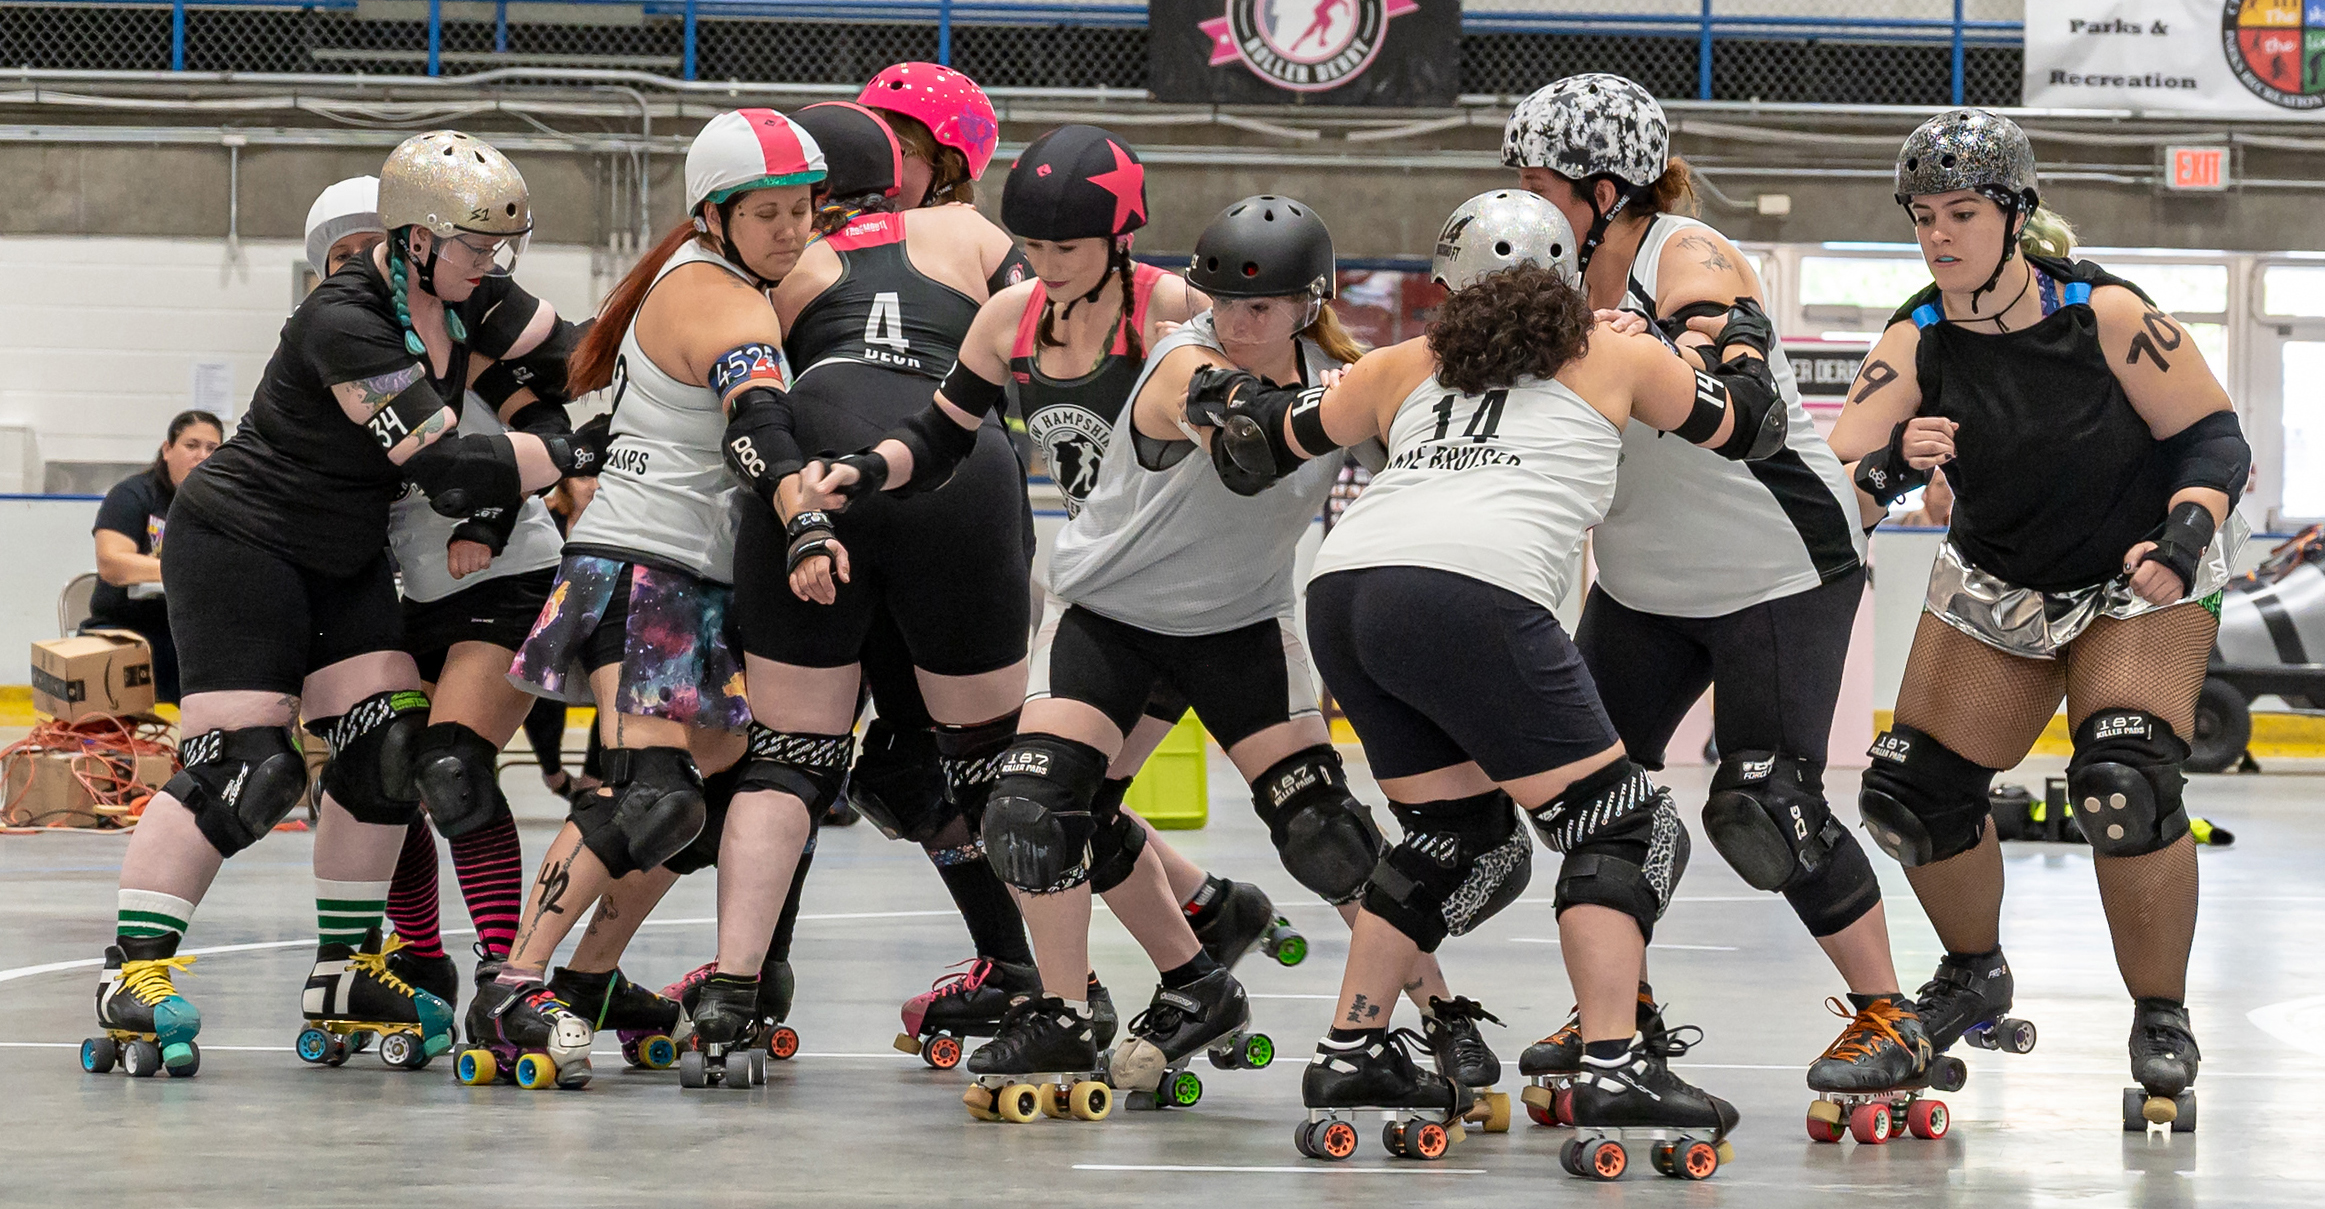 Moby dick roller derby